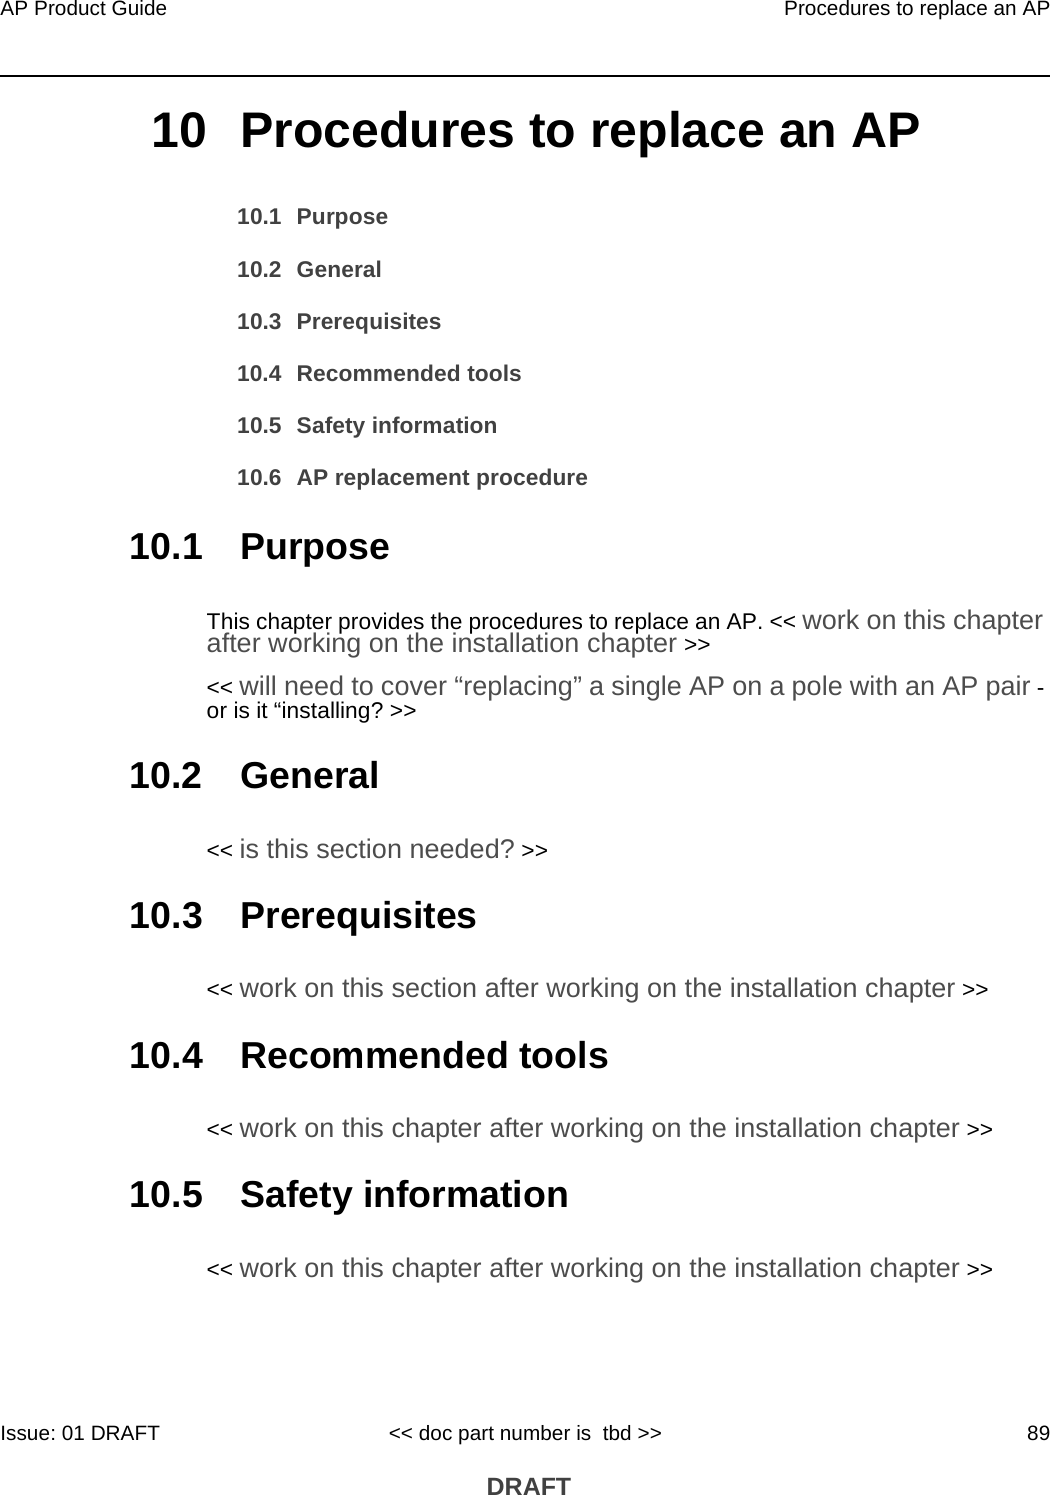 AP Product Guide Procedures to replace an APIssue: 01 DRAFT &lt;&lt; doc part number is  tbd &gt;&gt; 89 DRAFT10 Procedures to replace an AP10.1 Purpose10.2 General10.3 Prerequisites10.4 Recommended tools10.5 Safety information10.6 AP replacement procedure10.1 PurposeThis chapter provides the procedures to replace an AP. &lt;&lt; work on this chapter after working on the installation chapter &gt;&gt; &lt;&lt; will need to cover “replacing” a single AP on a pole with an AP pair - or is it “installing? &gt;&gt;10.2 General&lt;&lt; is this section needed? &gt;&gt;10.3 Prerequisites&lt;&lt; work on this section after working on the installation chapter &gt;&gt;10.4 Recommended tools&lt;&lt; work on this chapter after working on the installation chapter &gt;&gt;10.5 Safety information&lt;&lt; work on this chapter after working on the installation chapter &gt;&gt;